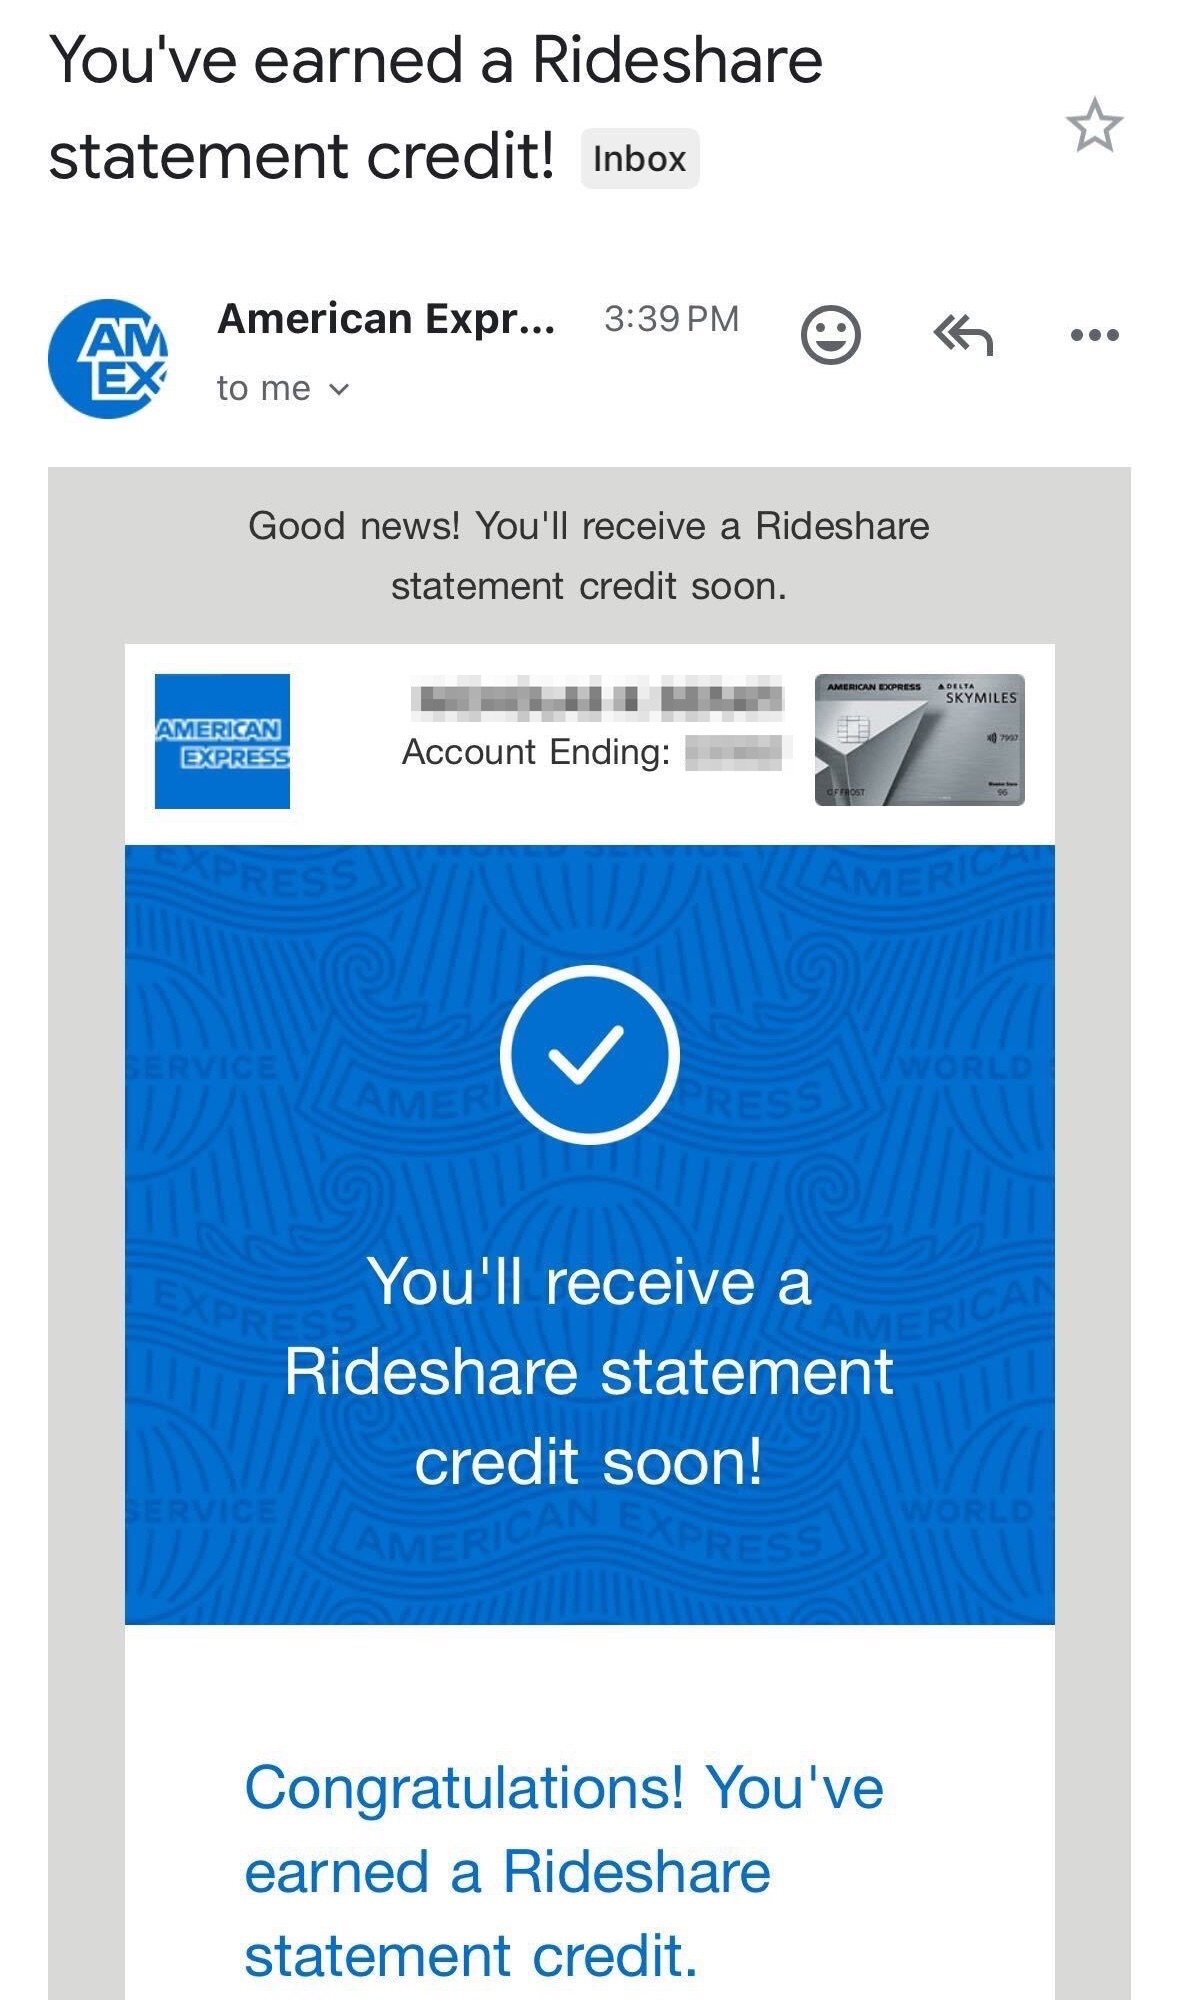 Amex Rideshare Credit email confirmation